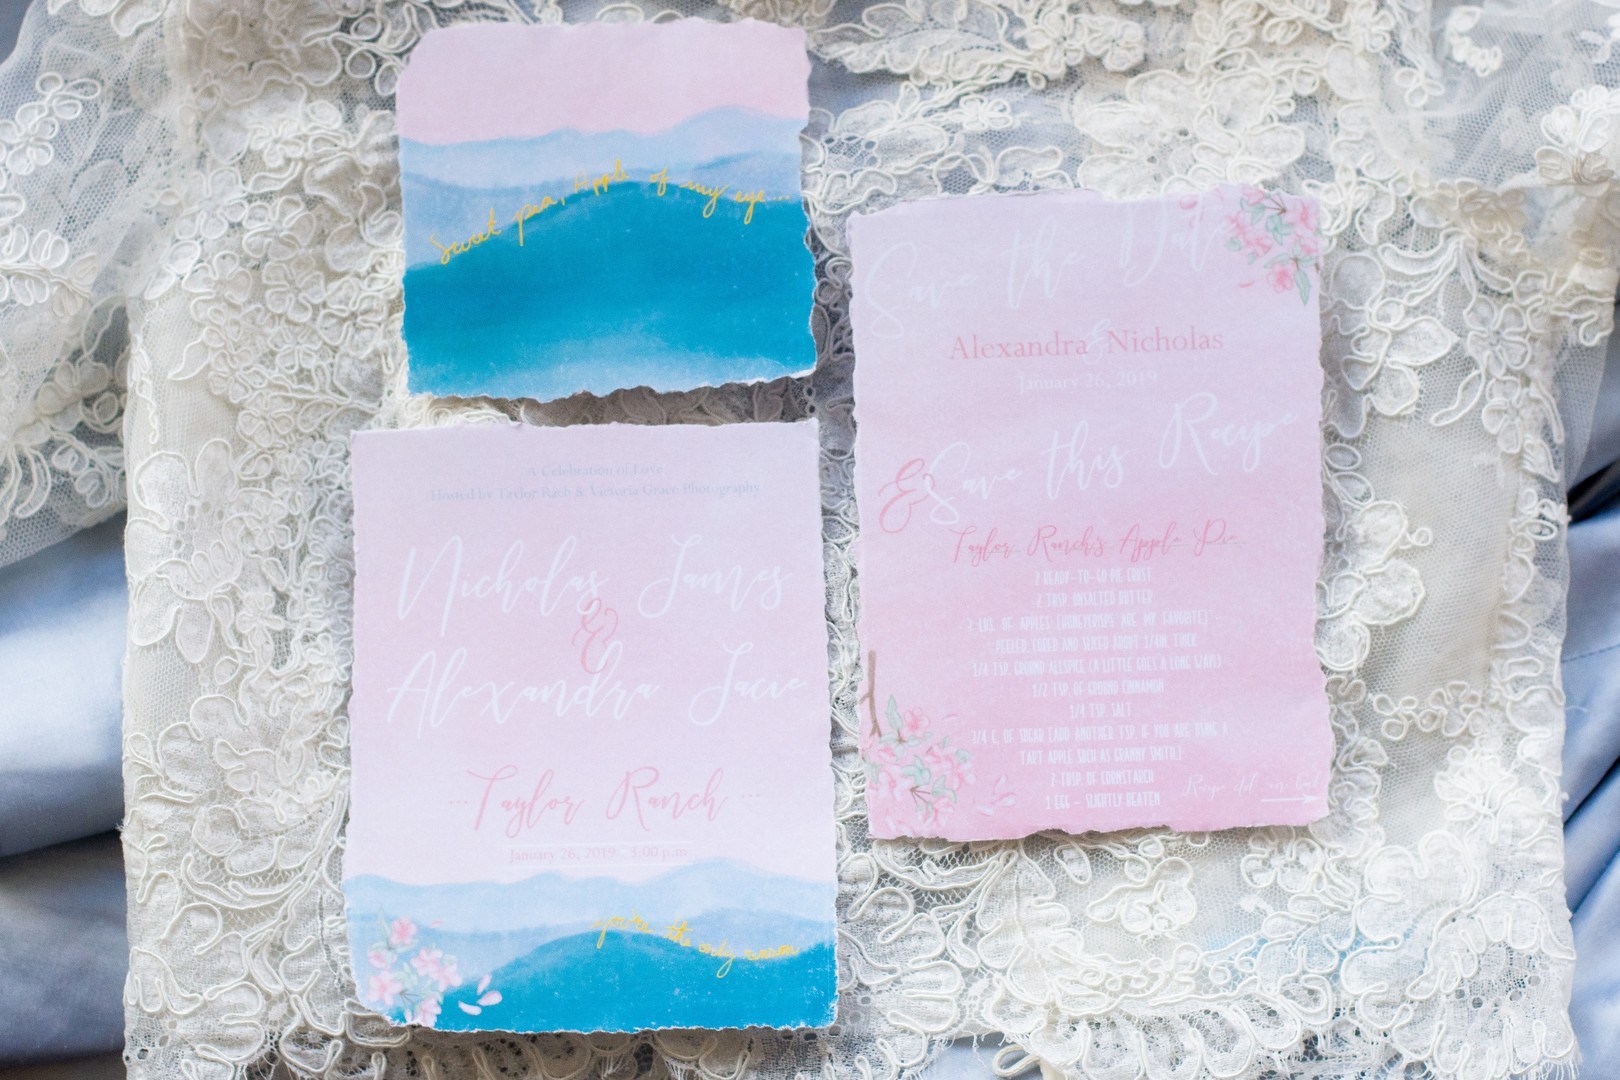 The wedding stationary was done with watercolors and in pink and blue